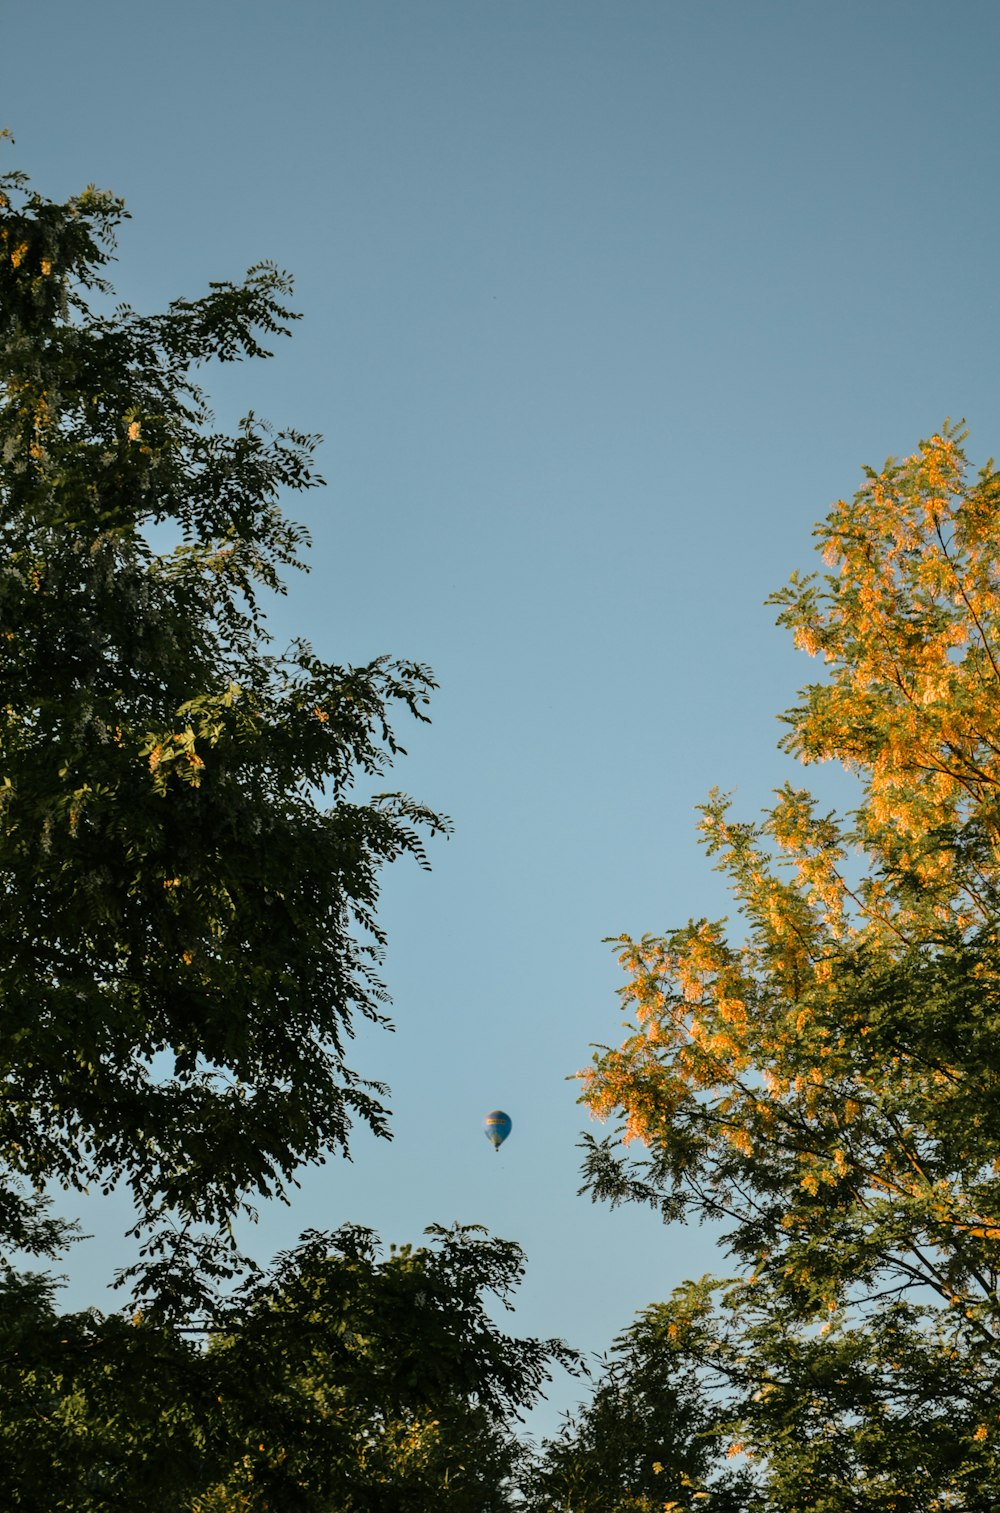 a balloon flying through a blue sky above some trees